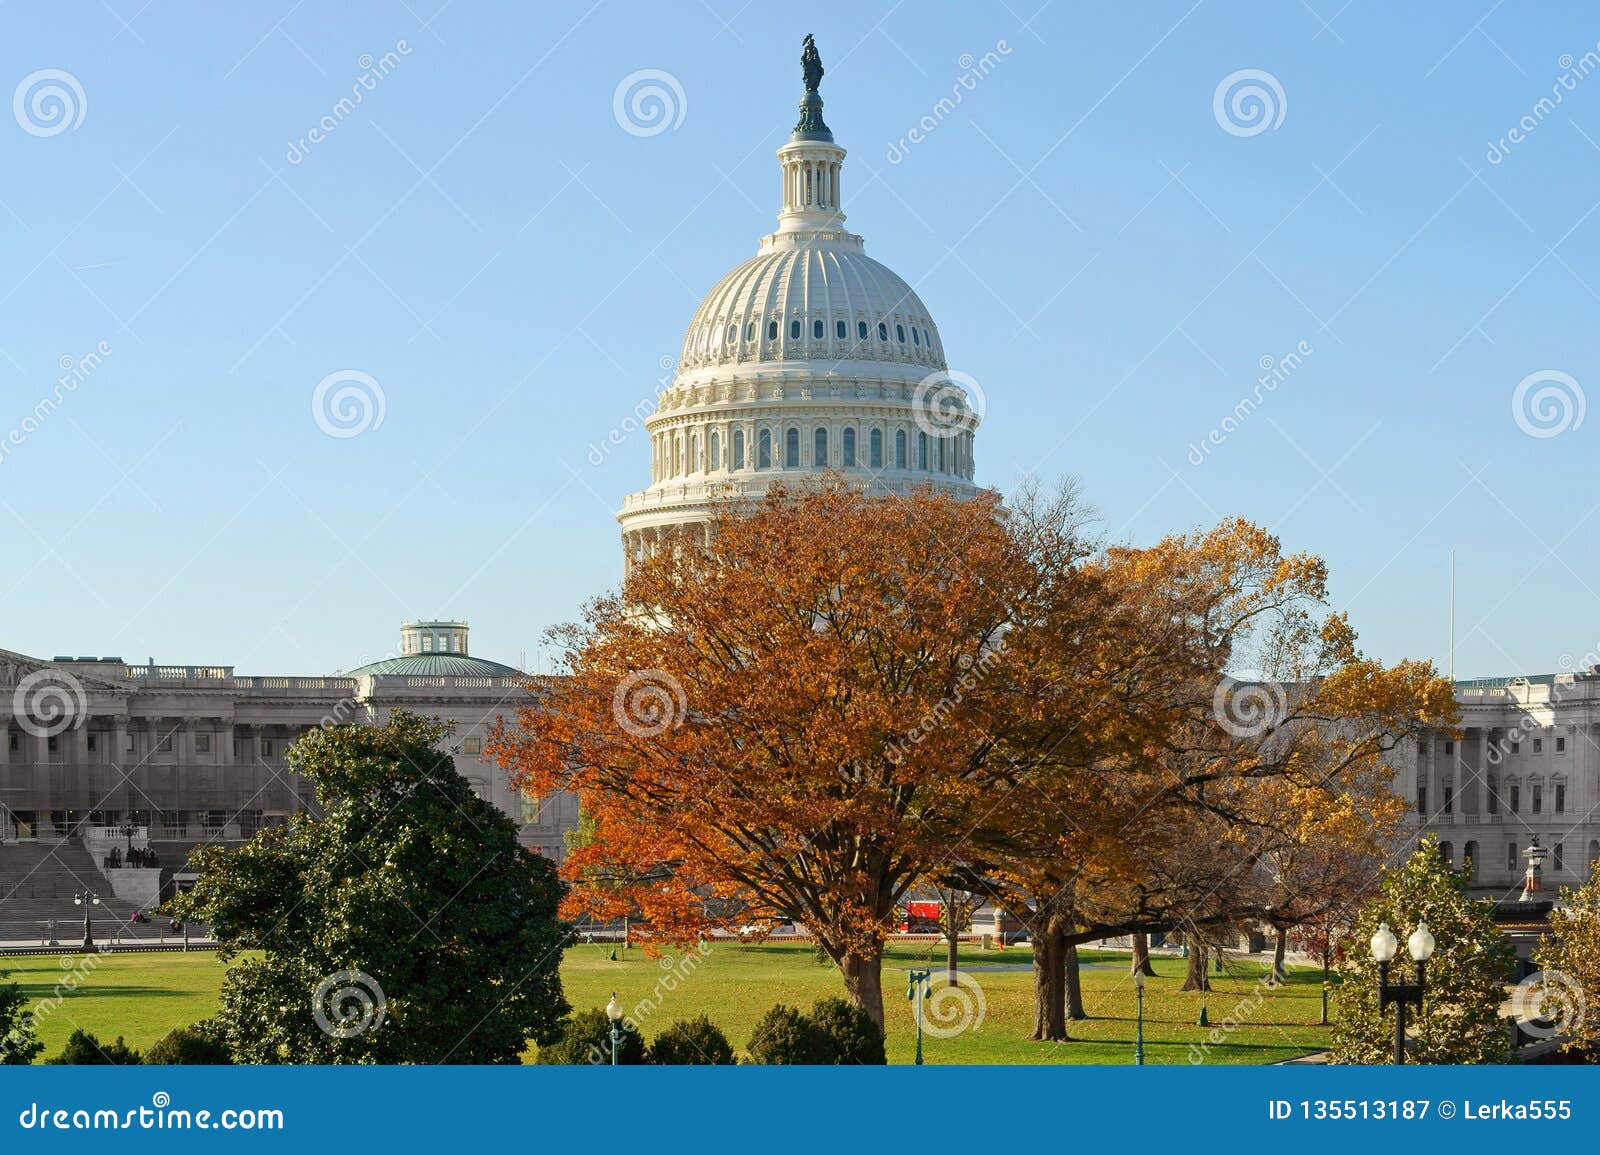 Legislative branch in session hi-res stock photography and images - Alamy